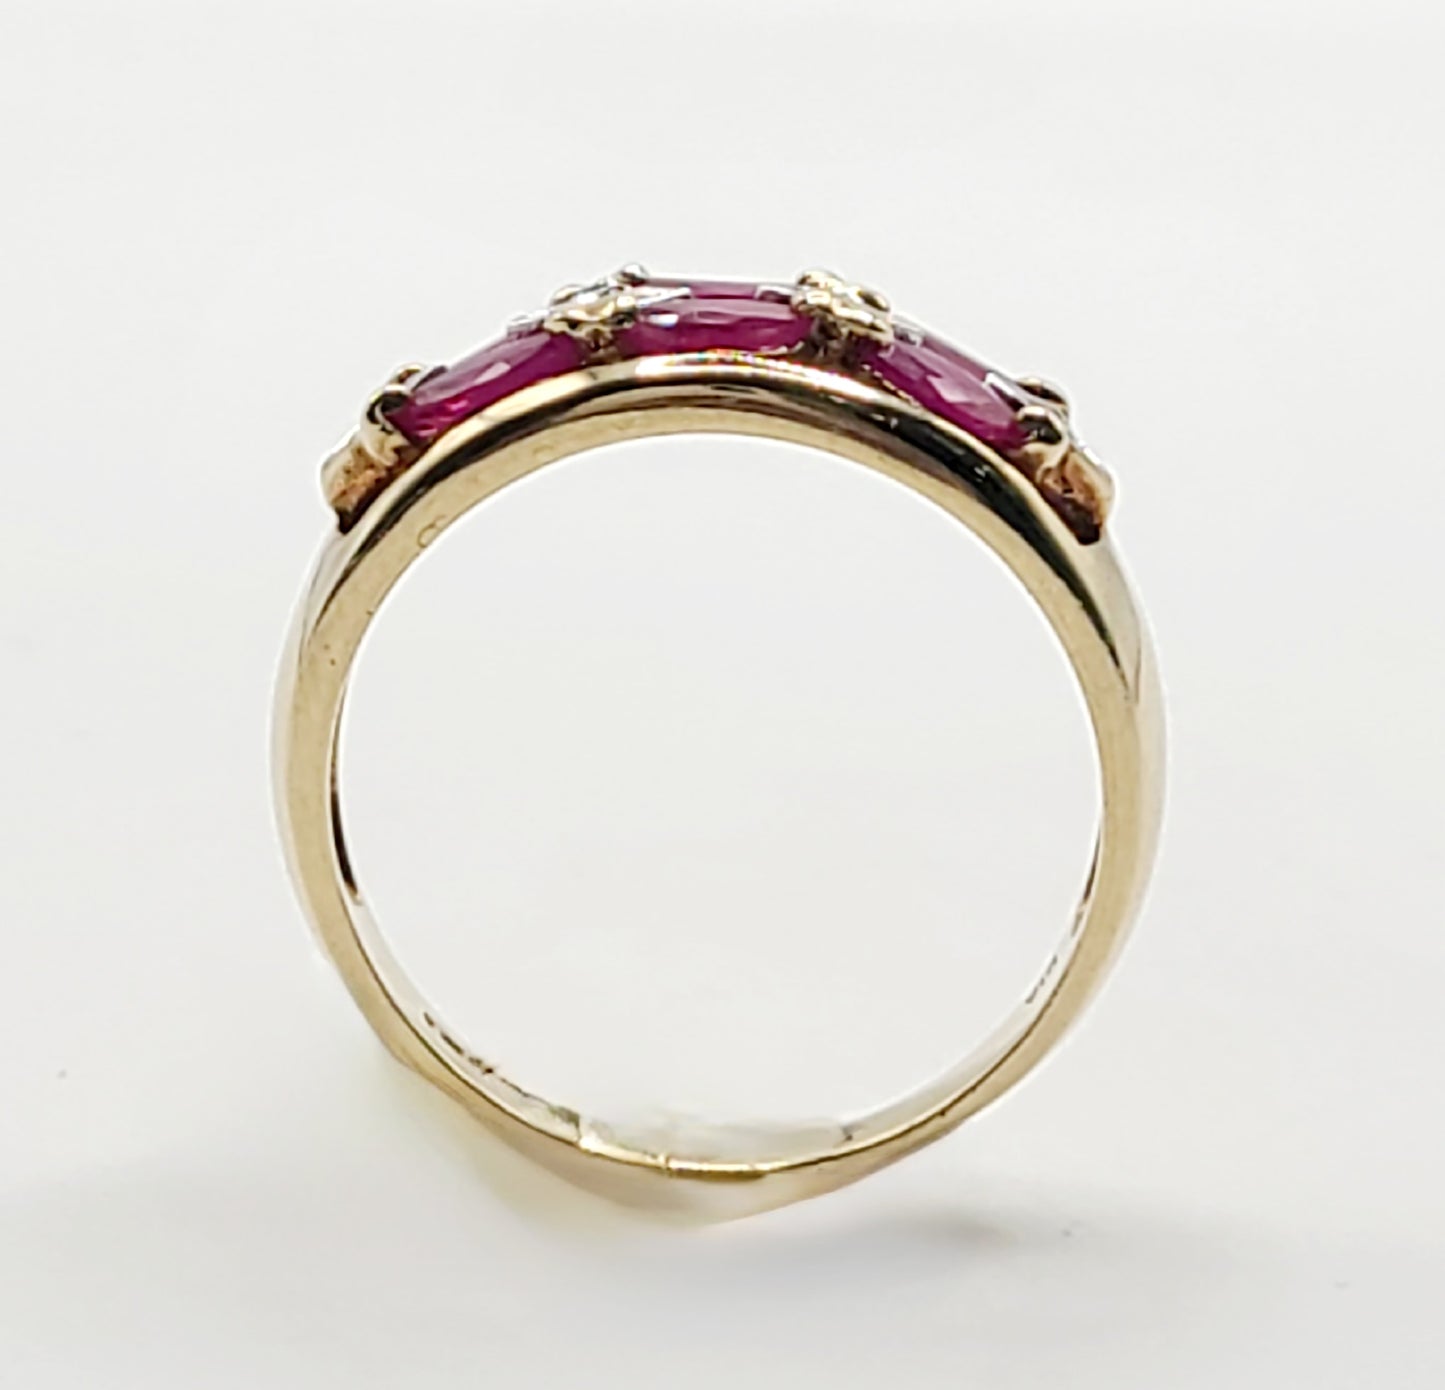 Ruby & Diamond 9ct Gold Ring - size R